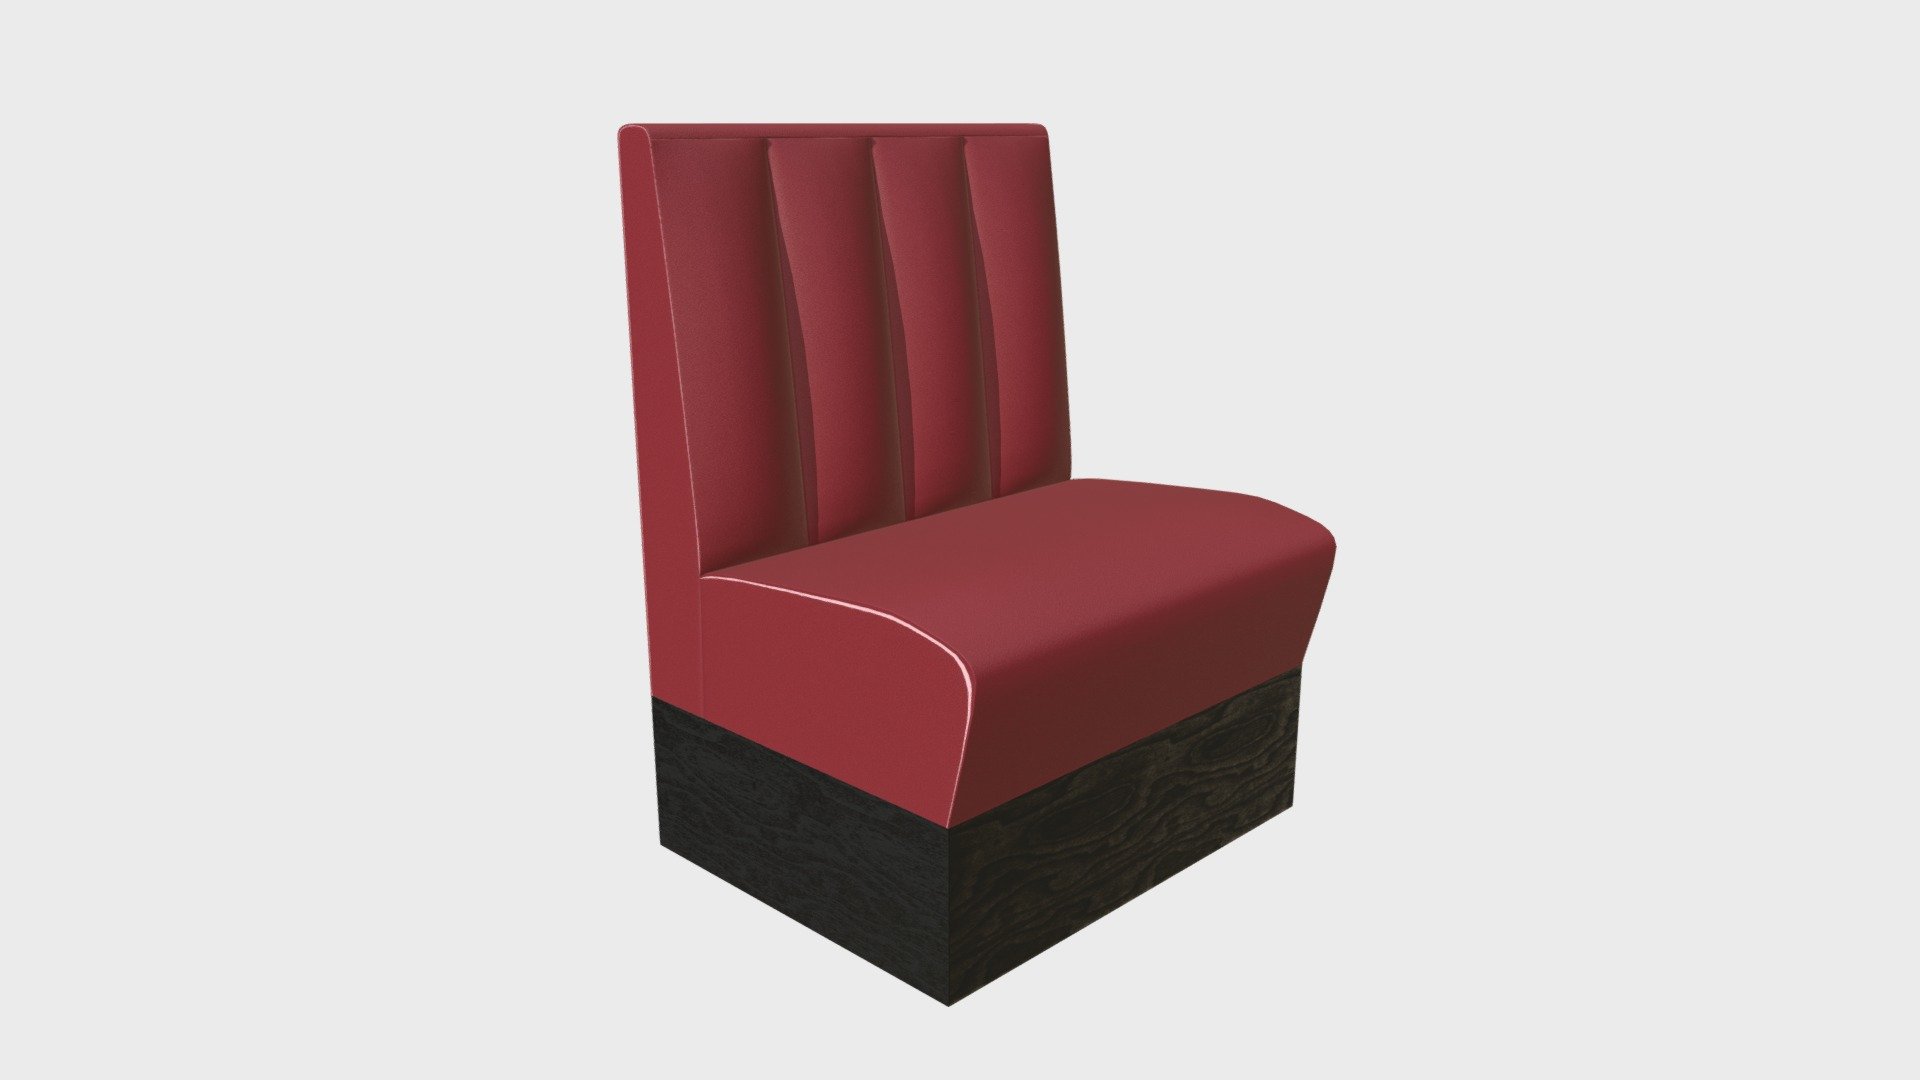 === The following description refers to the additional ZIP package provided with this model ===

Single seat diner bank couch chair 3D Model. Production-ready 3D Model, with PBR materials, textures, non overlapping UV Layout map provided in the package.

Quads only geometries (no tris/ngons).

Formats included: FBX, OBJ; scenes: BLEND (with Cycles / Eevee PBR Materials and Textures); other: png with Alpha.

1 Object (mesh), 1 PBR Material, UV unwrapped (non overlapping UV Layout map provided in the package); UV-mapped Textures.

UV Layout maps and Image Textures resolutions: 2048x2048; PBR Textures made with Substance Painter.

Polygonal, QUADS ONLY (no tris/ngons); 8626 vertices, 8624 quad faces (17248 tris).

Real world dimensions; scene scale units: cm in Blender 3.1 (that is: Metric with 0.01 scale).

Uniform scale object (scale applied in Blender 3.1) 3d model